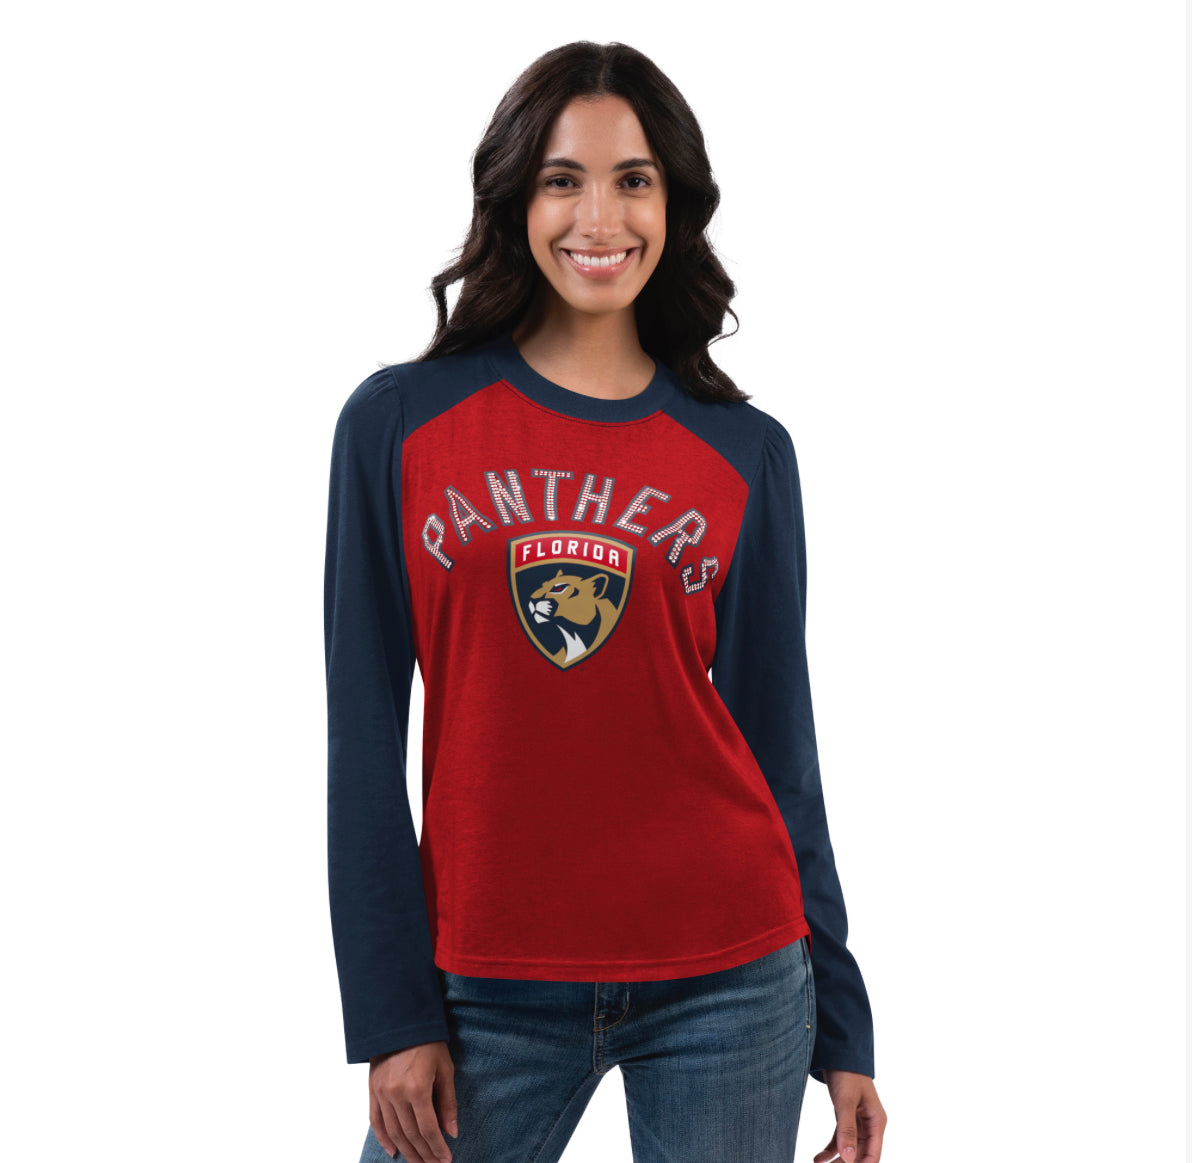 Florida Panthers G-lll 4Her Women's Colorblock L/S Rhinestone T-Shirt